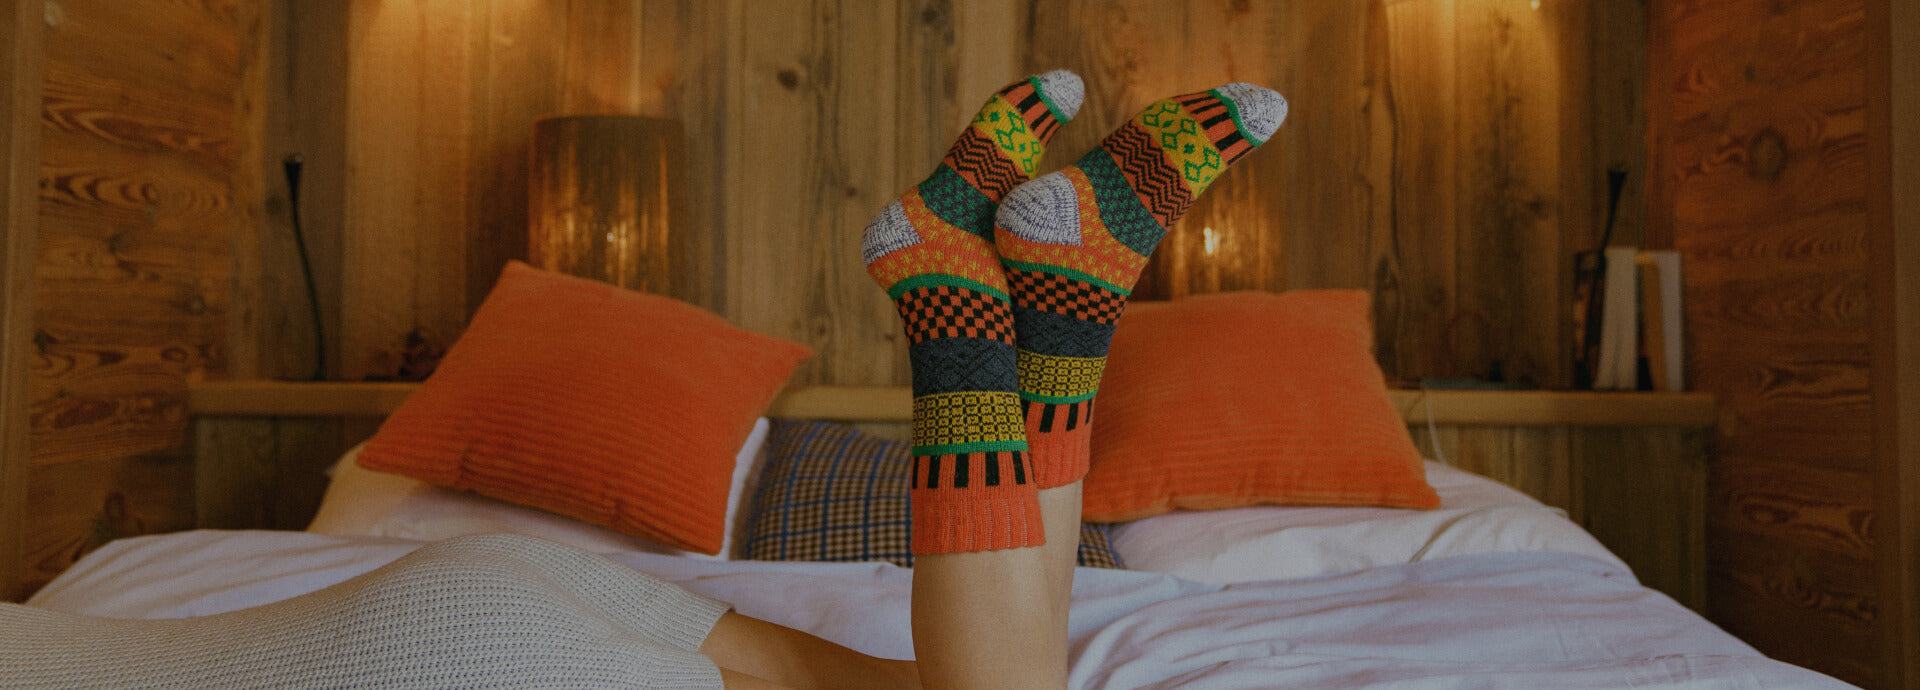 The Pros and Cons of Wearing Socks to Bed